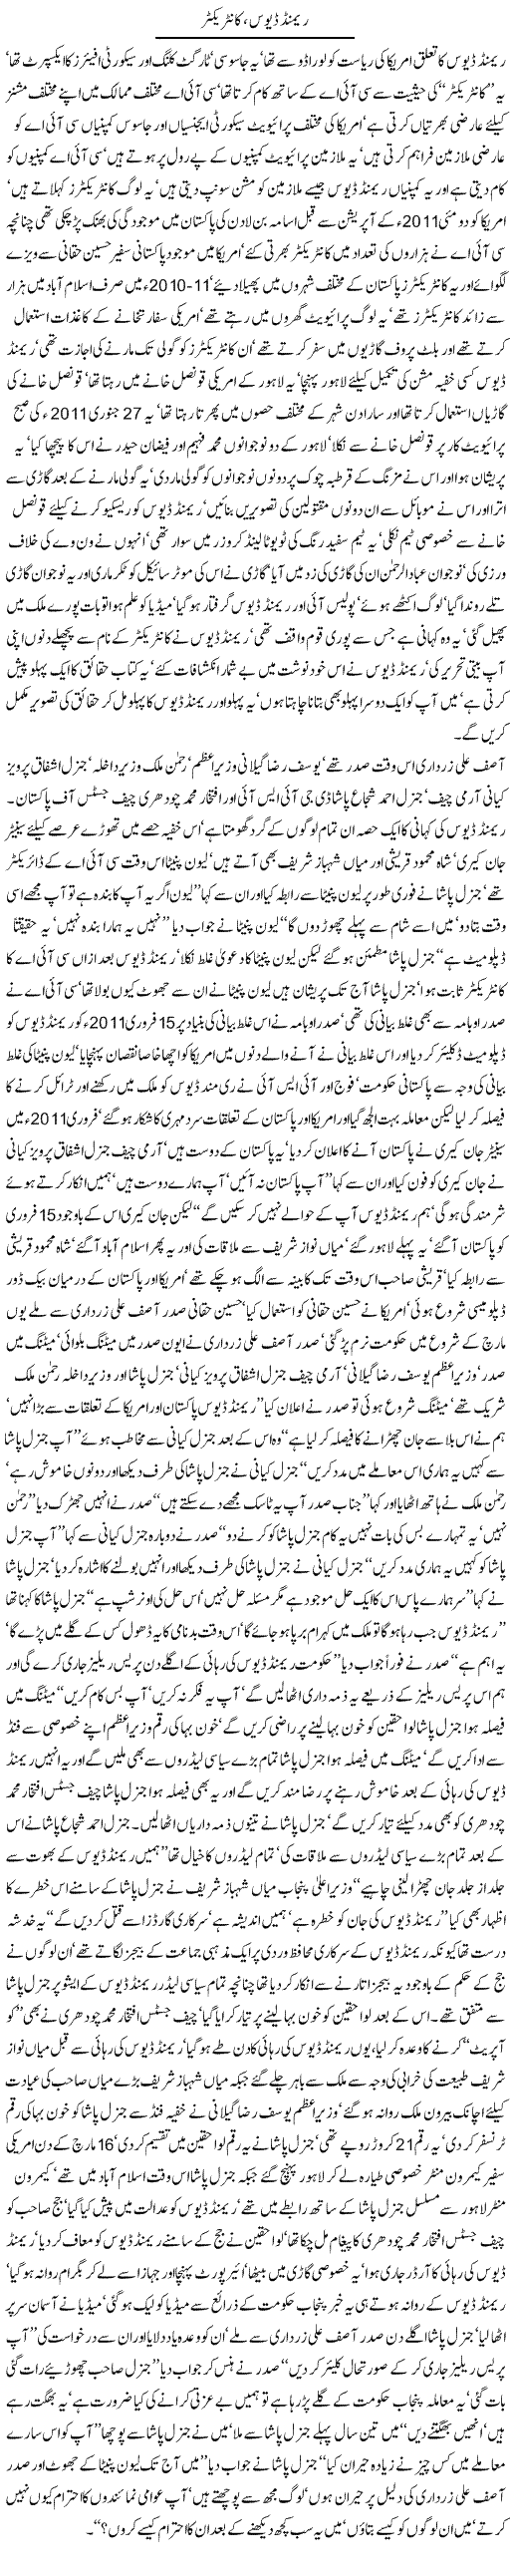 Raymond Davis Contractor By Javed Chaudhry